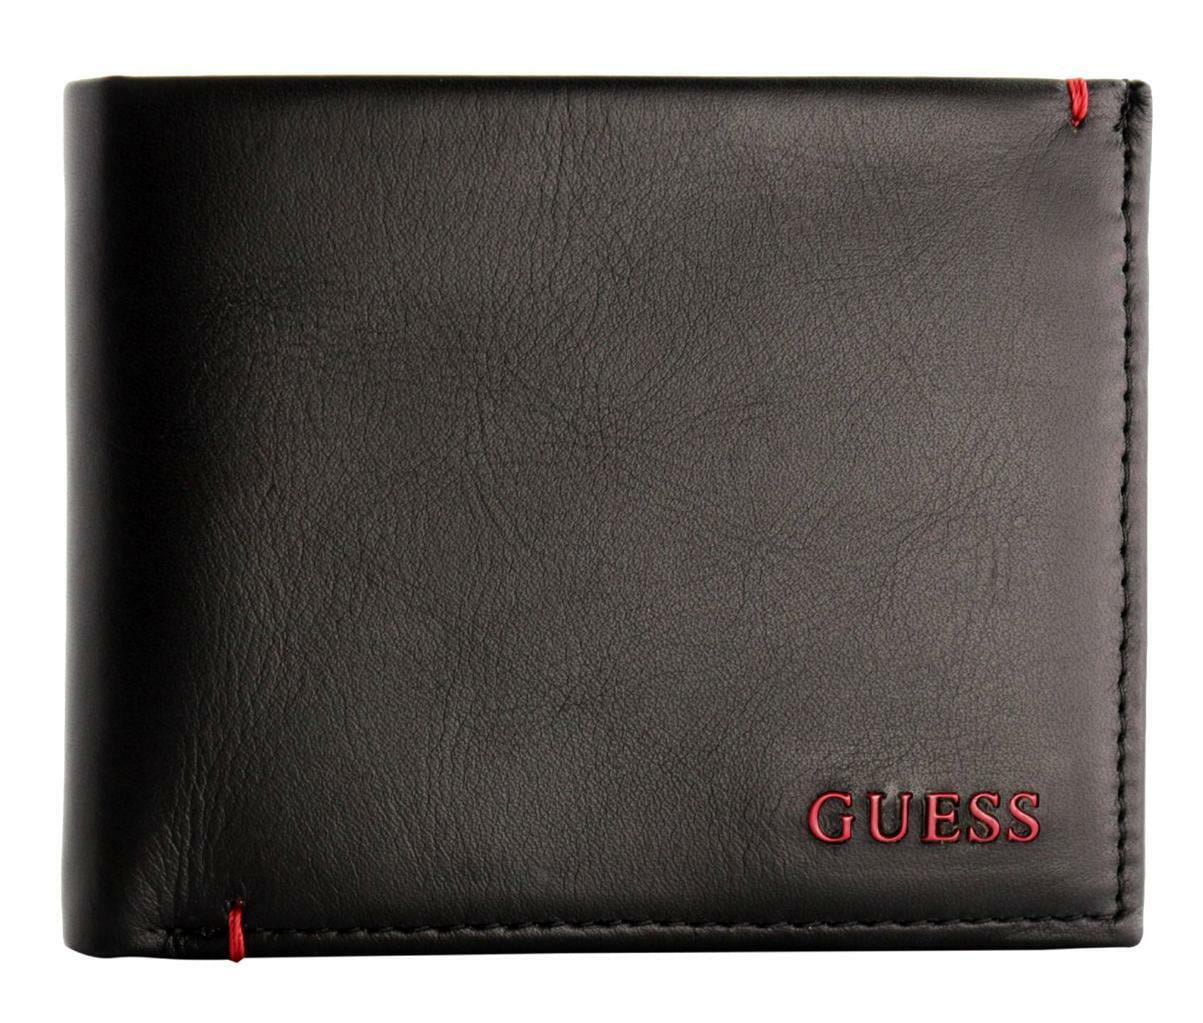 GUESS - Guess Men's Premium Leather Double Billfold Credit Card Wallet ...